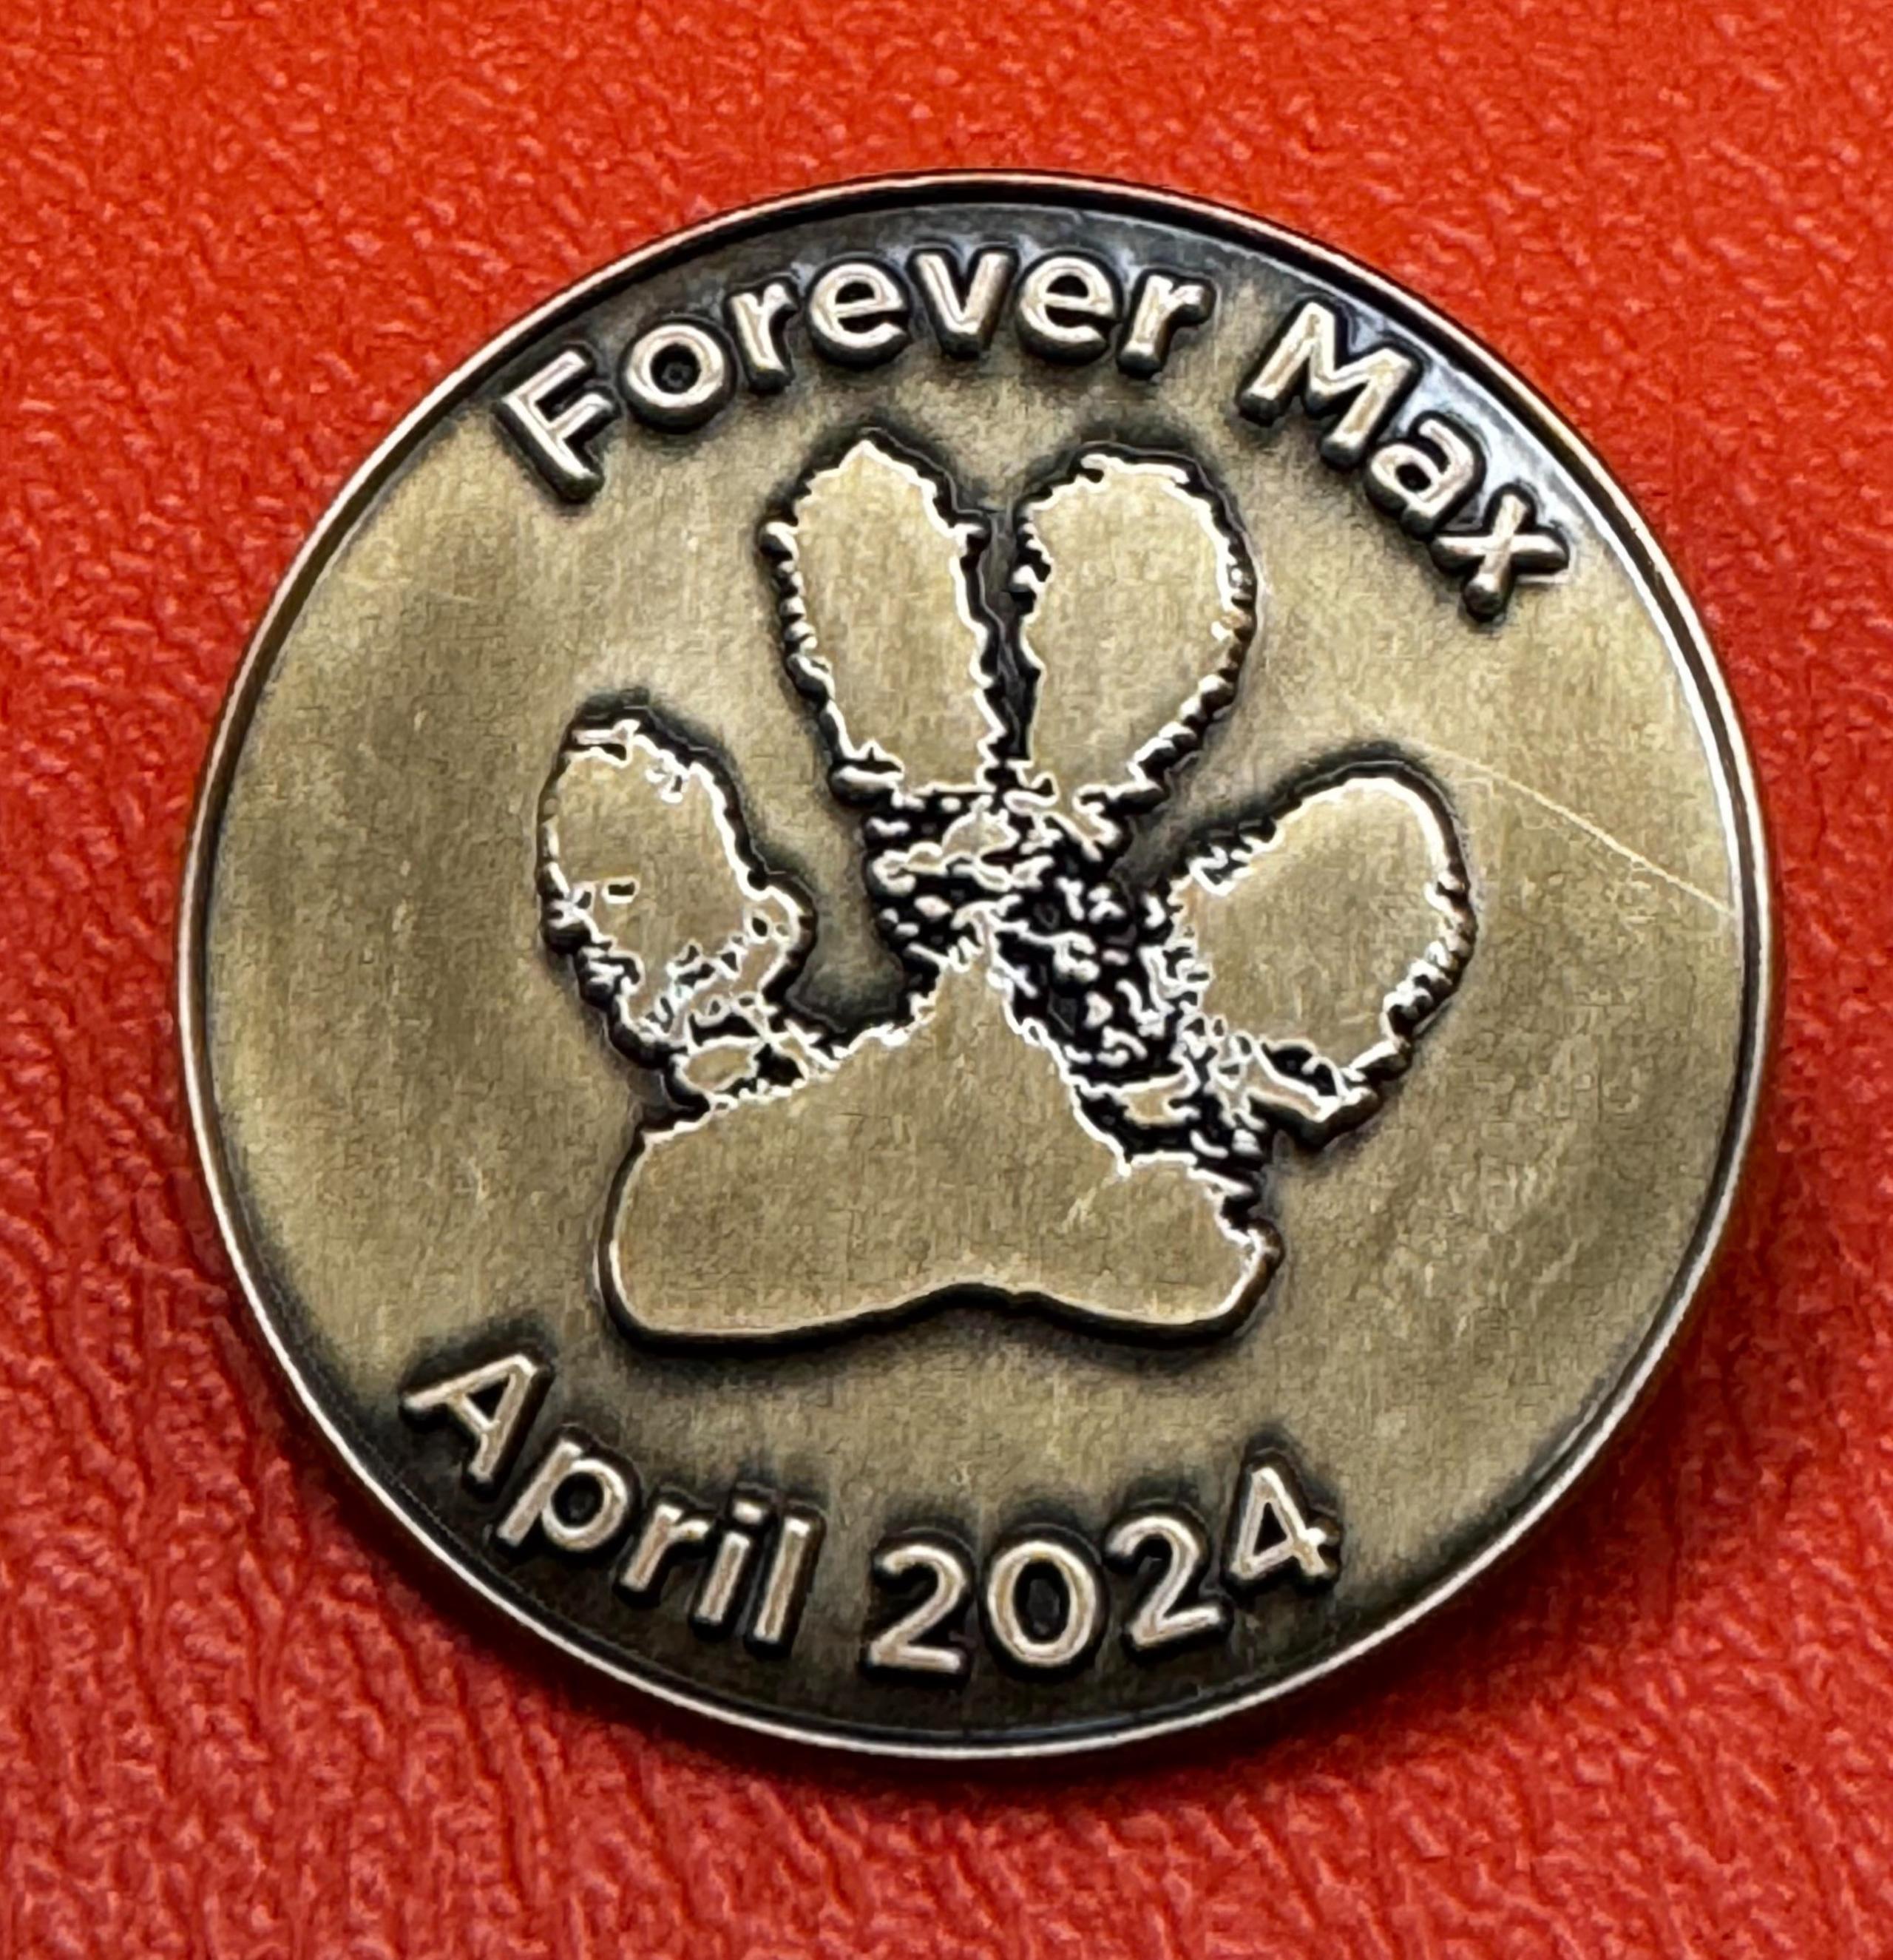 New pin badge forever Max